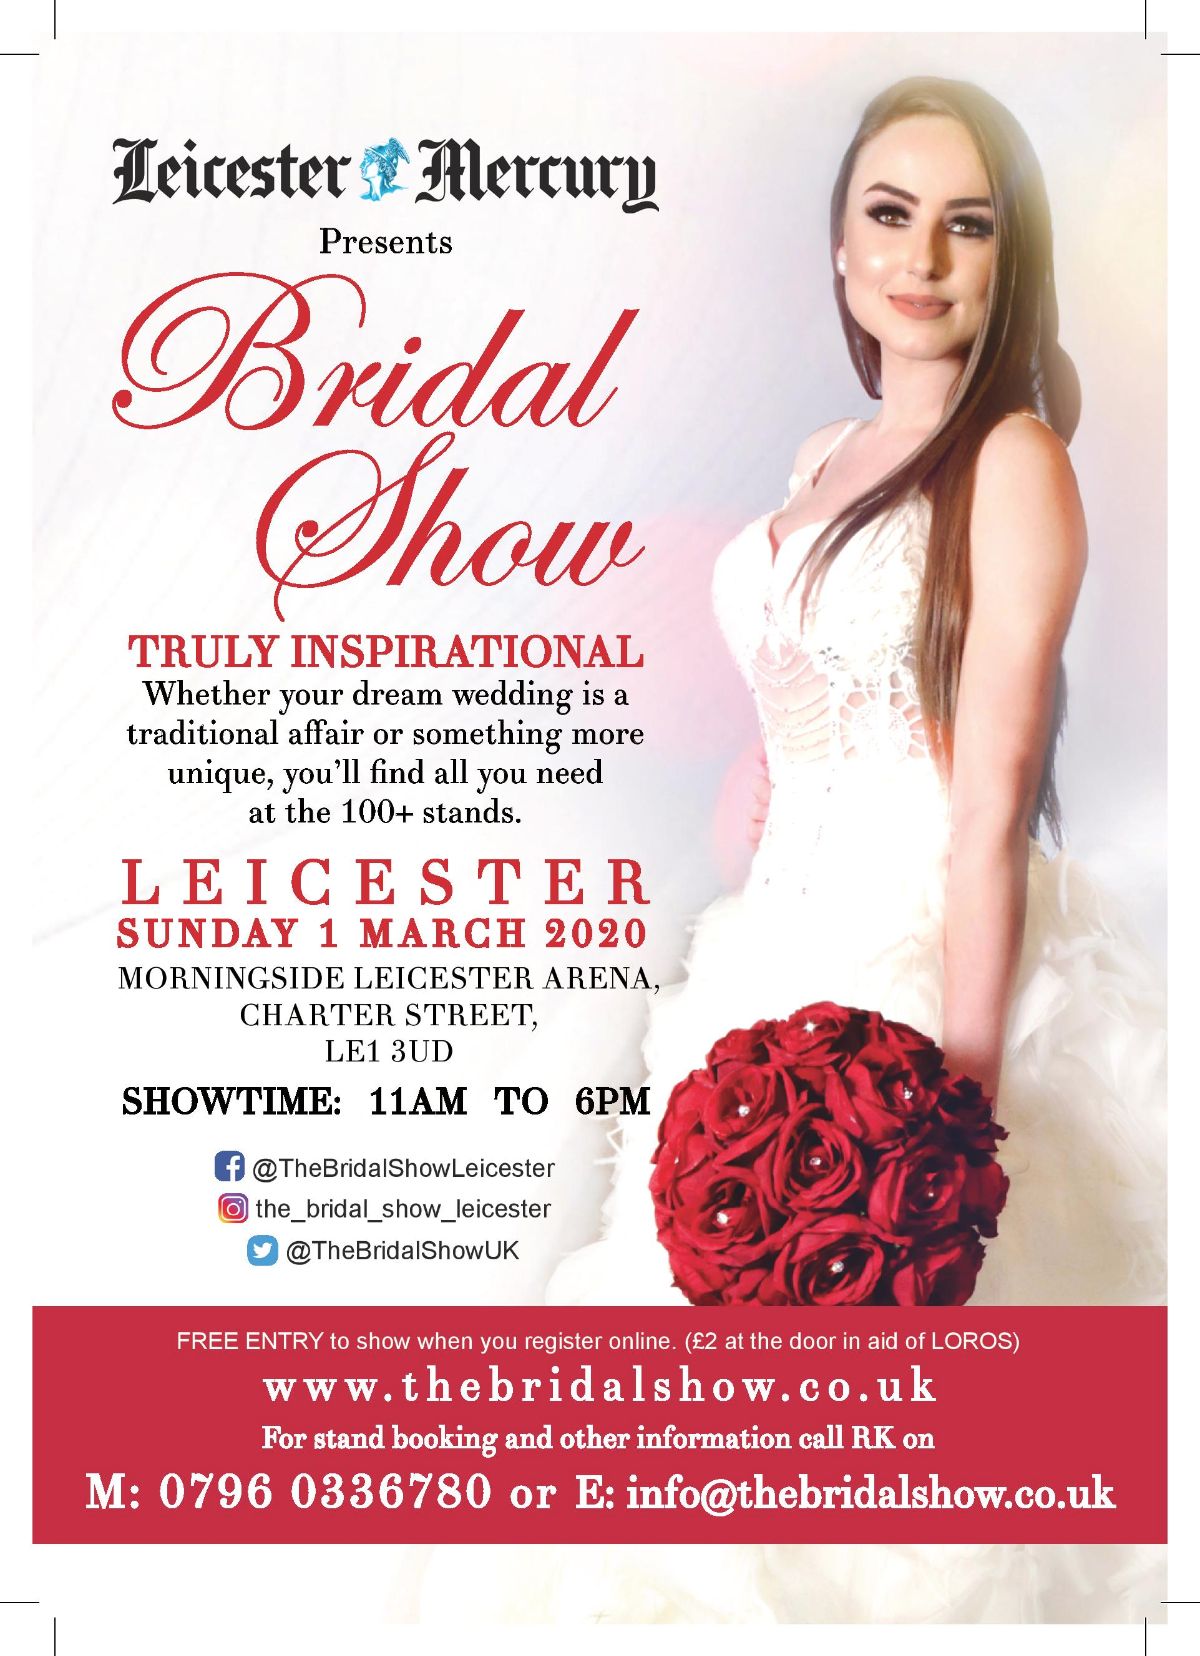 The Bridal Show - Biggest in East Midlands -Image-10